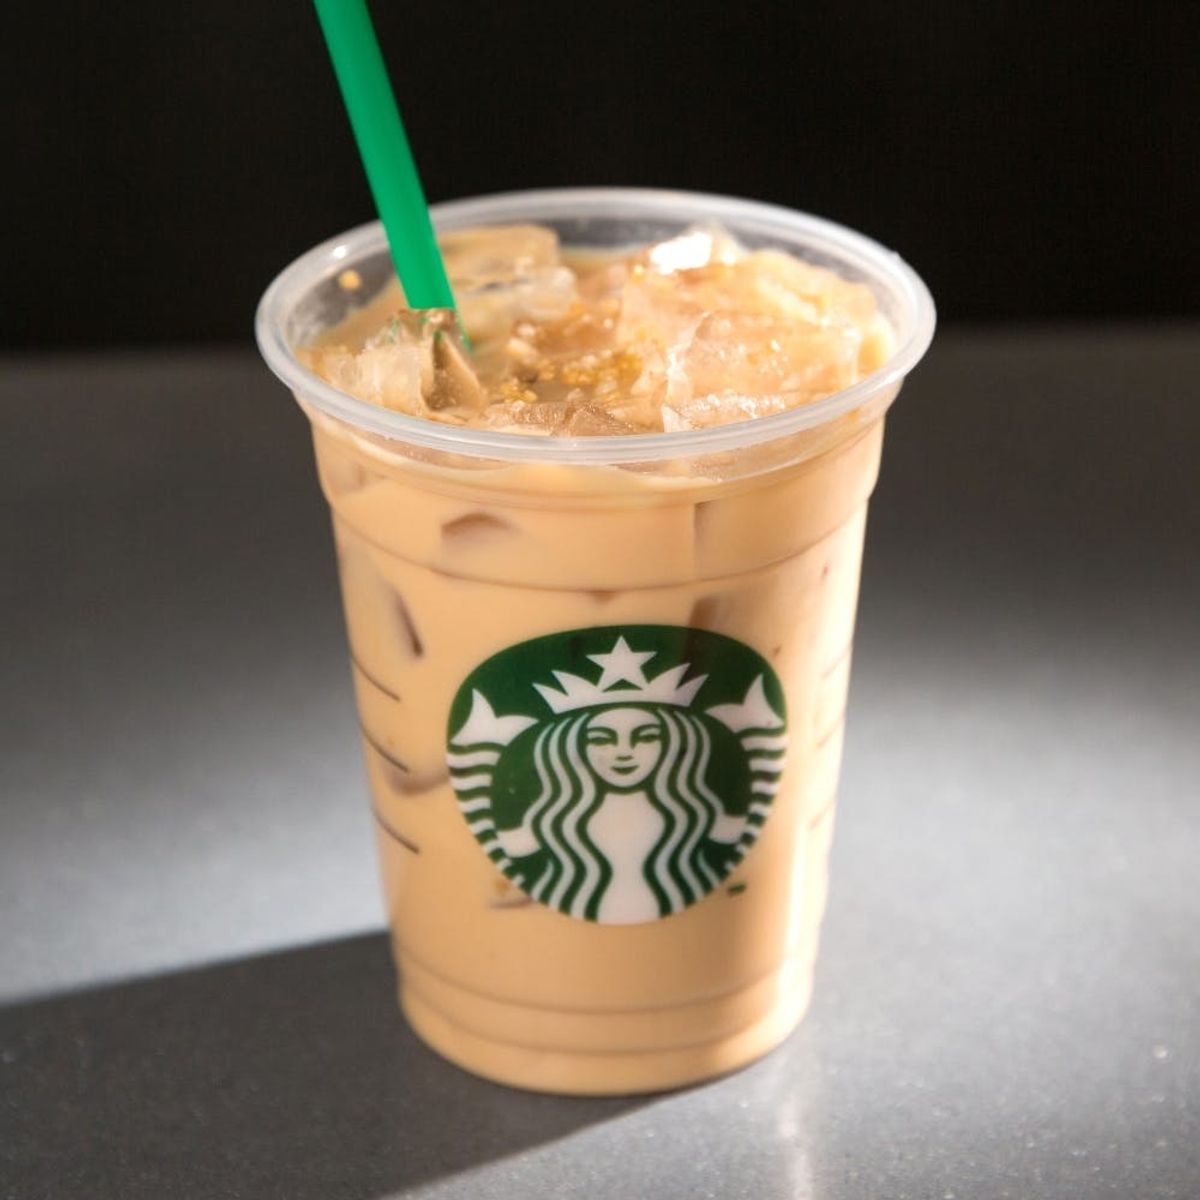 Starbucks Just Introduced ANOTHER Brand New Latte *and* Frappuccino